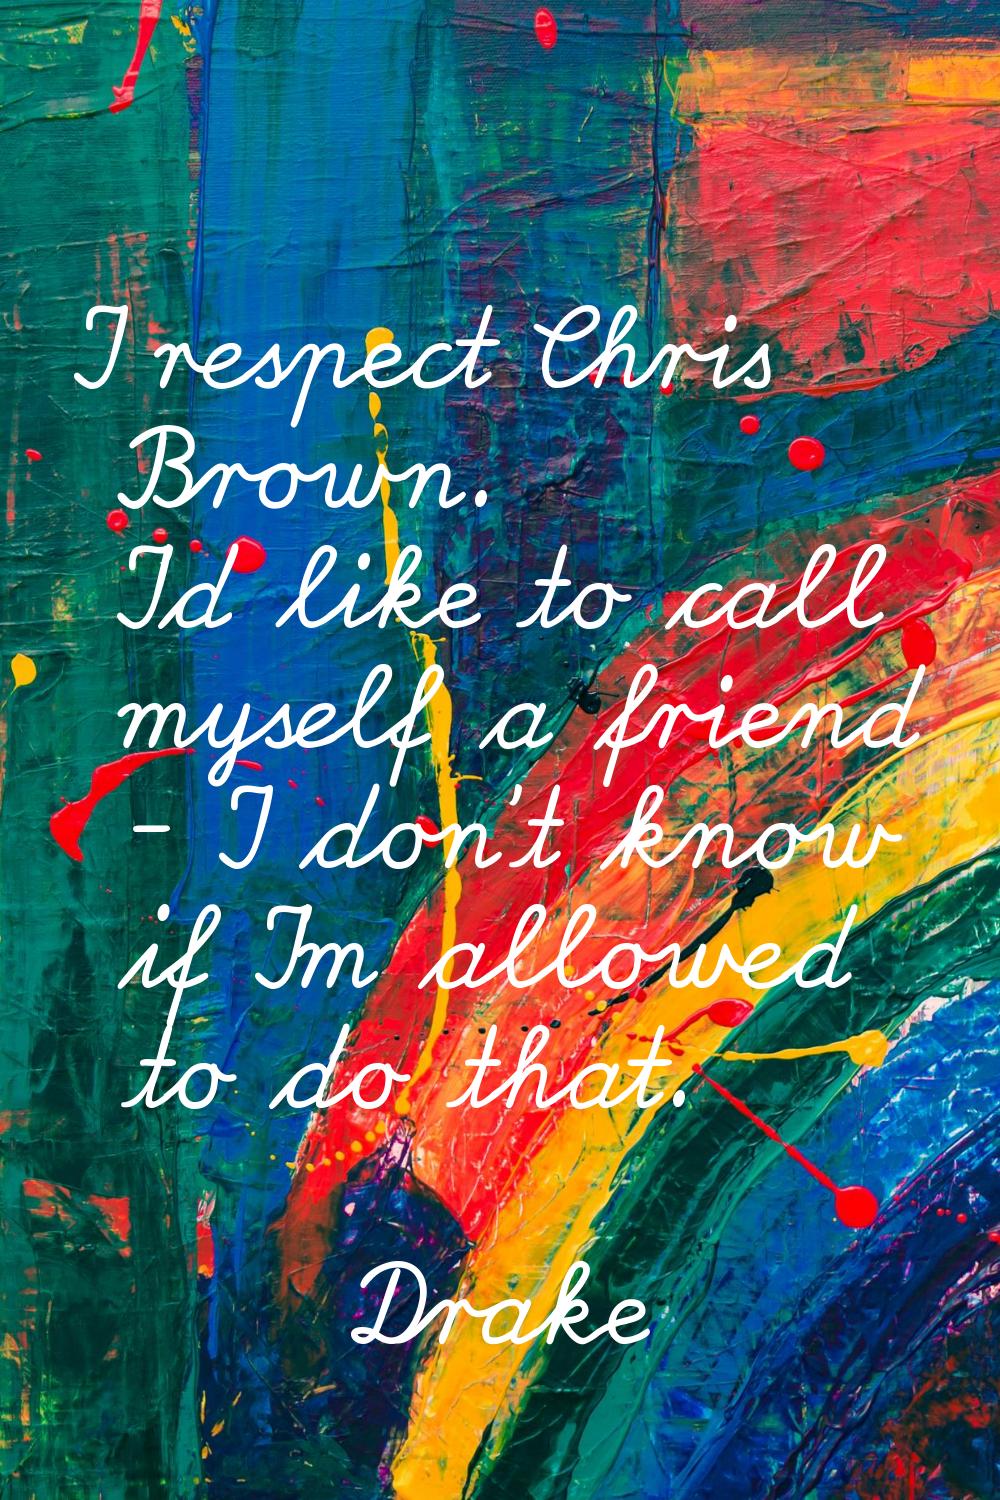 I respect Chris Brown. I'd like to call myself a friend - I don't know if I'm allowed to do that.